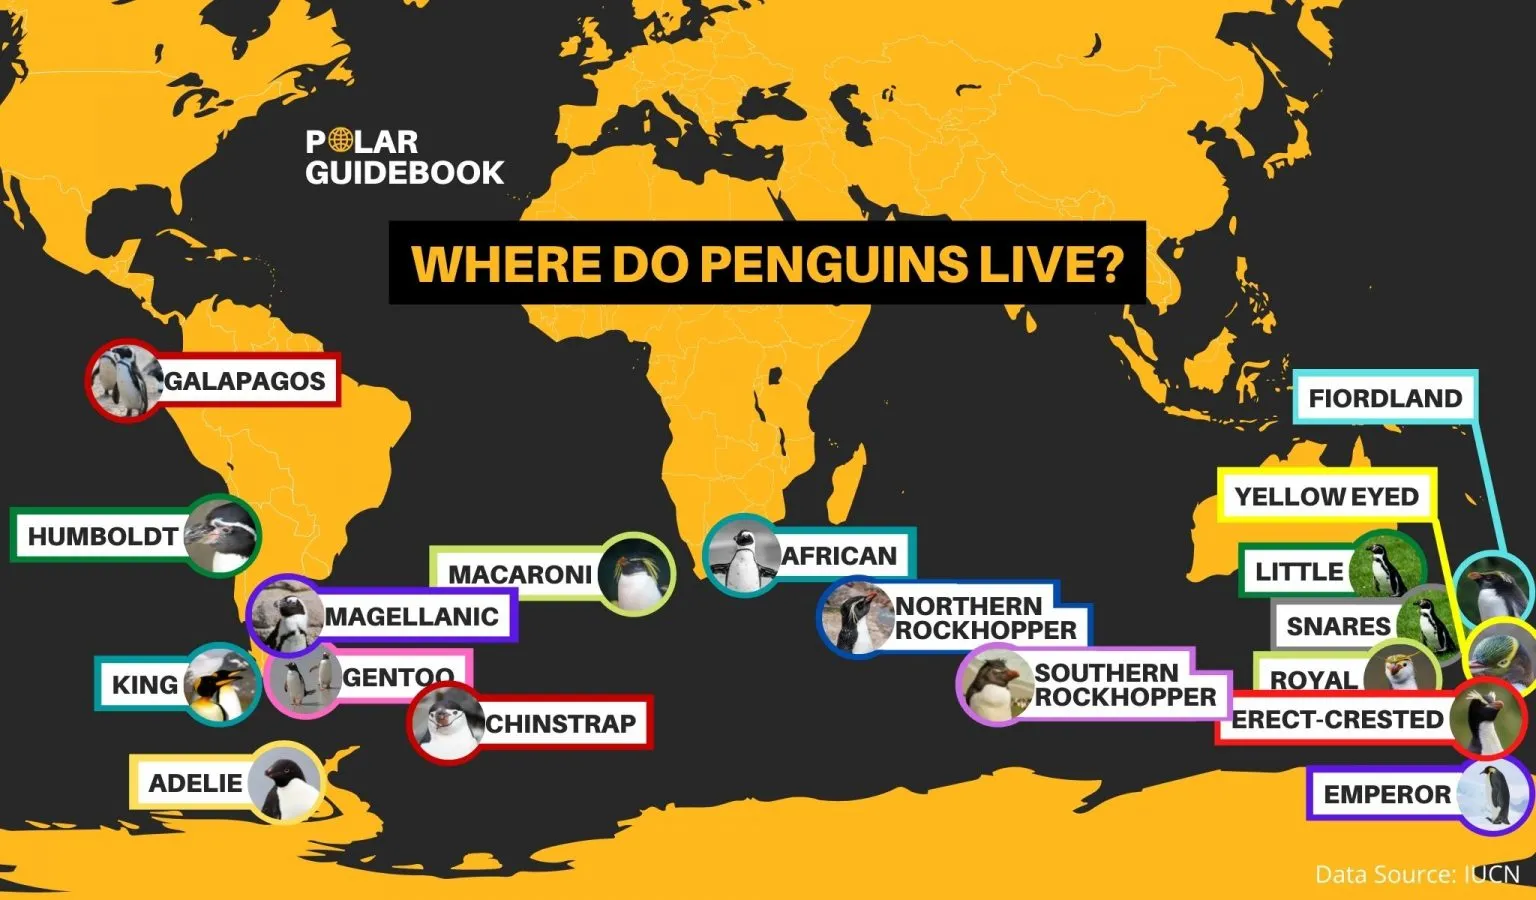 Where Do Penguins Live? [With Map] Polar Guidebook